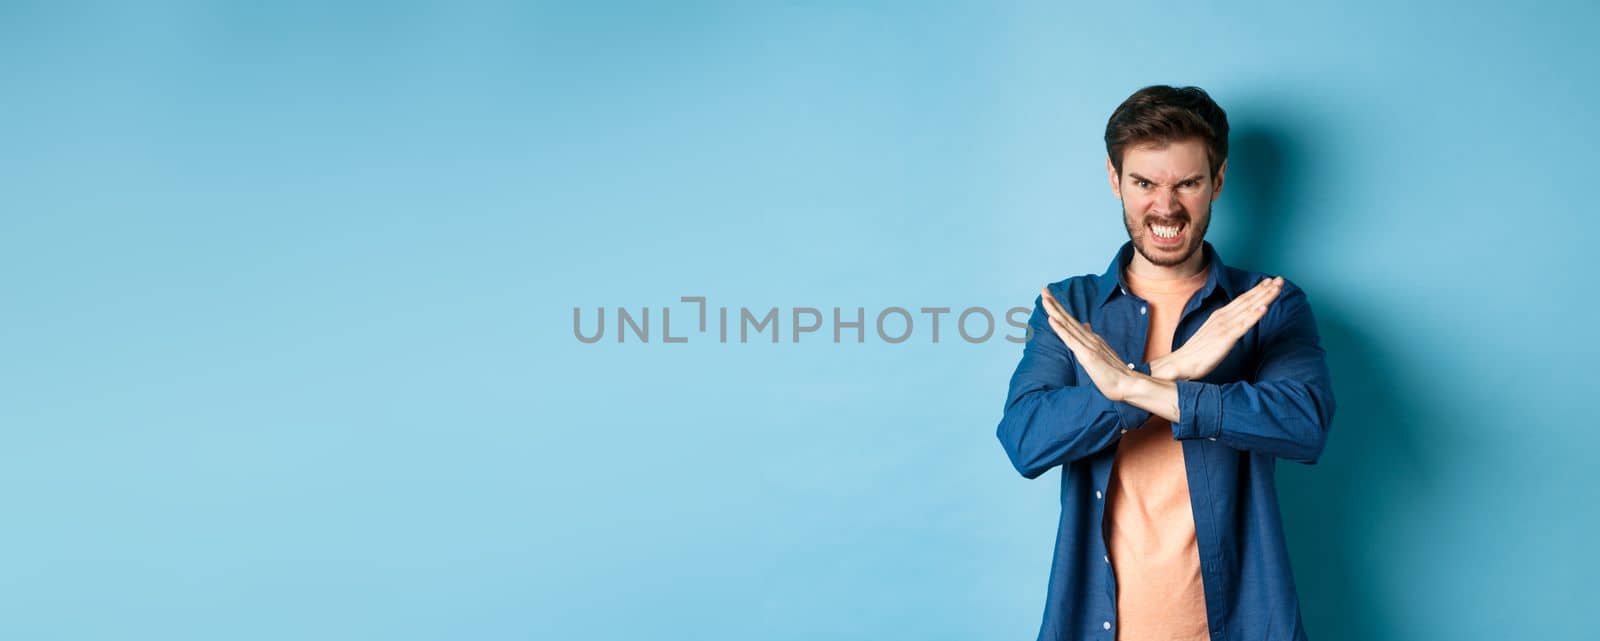 Angry young man frowning and clenching teeth outraged, showing cross gesture to stop or forbid something, standing on blue background.